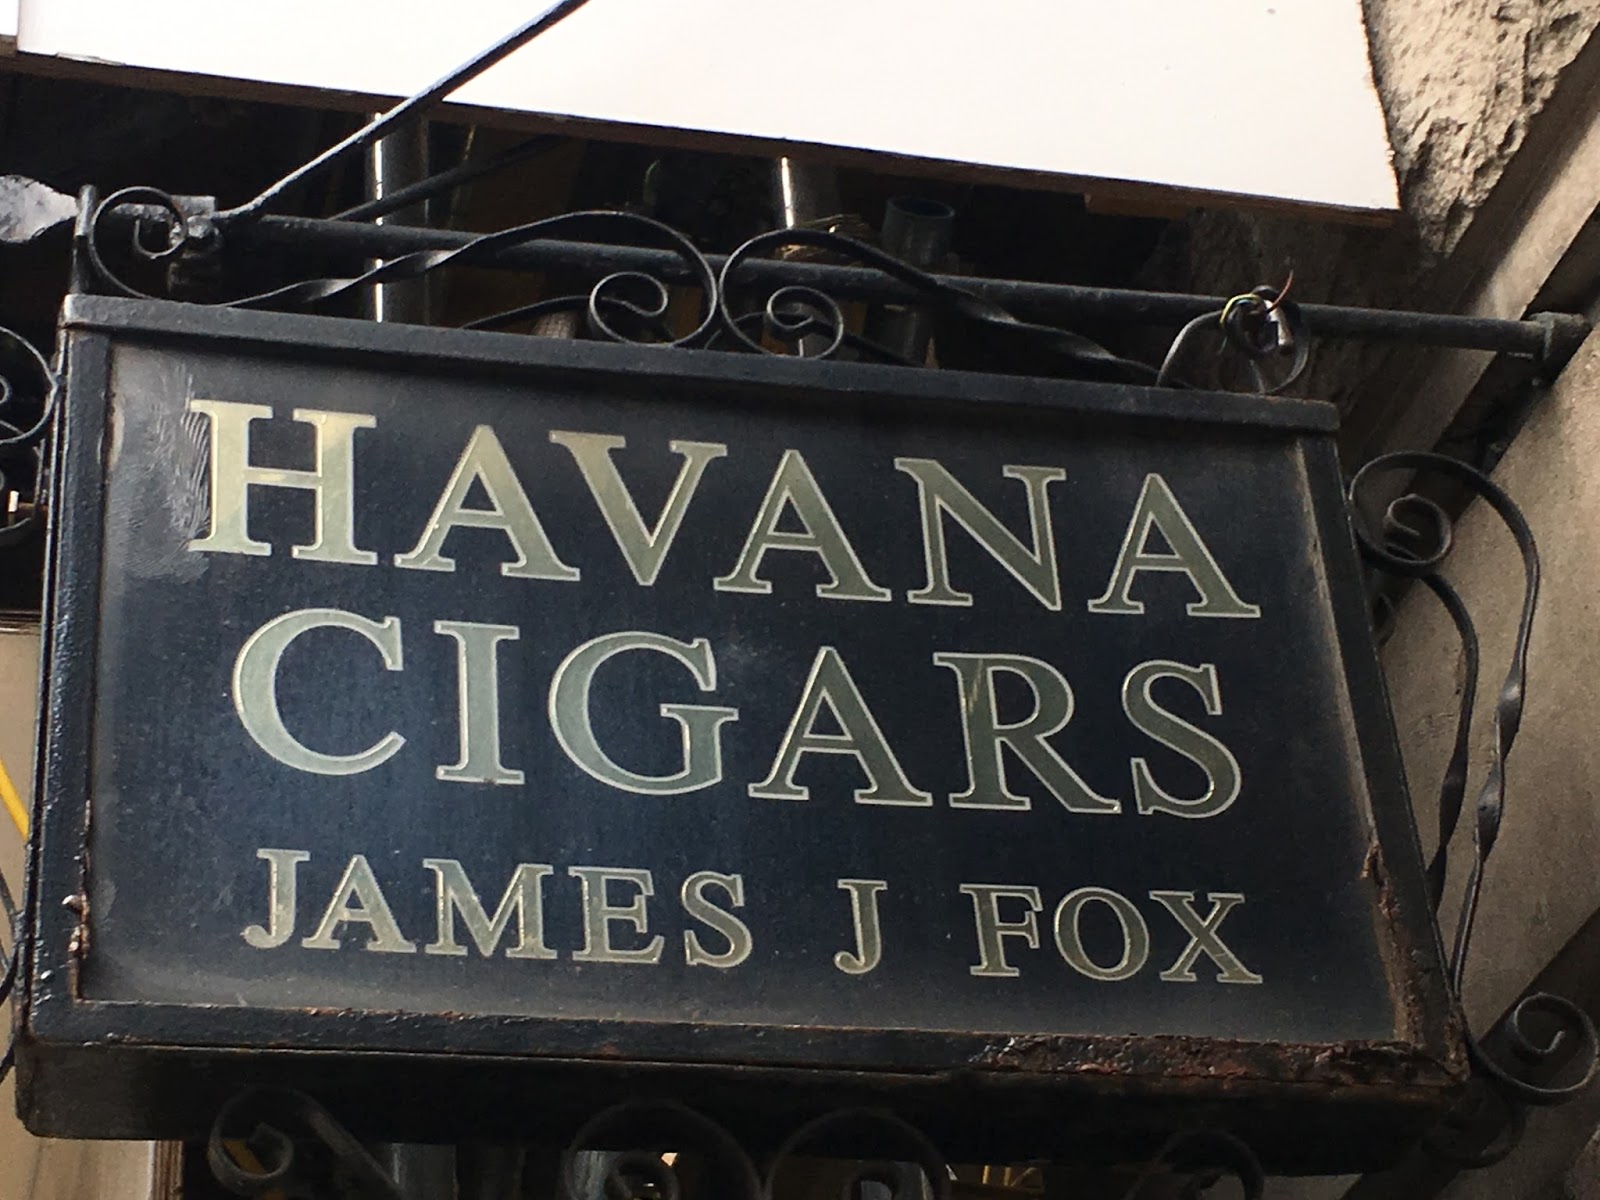 The Life of an Anglo-American: A Taste of Cuba in London... Cuban Cigars and JJ. Fox